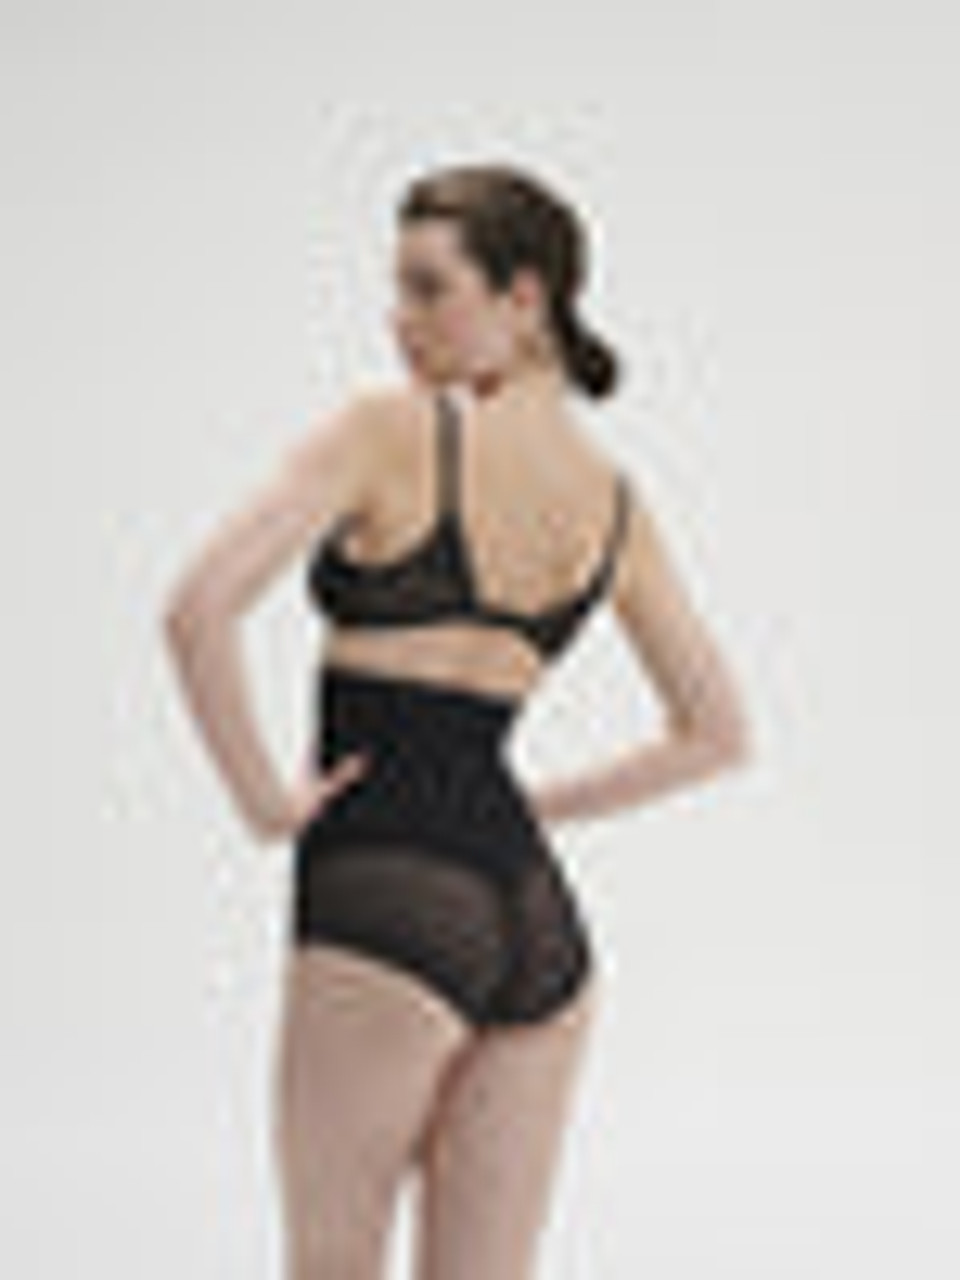 Simone Perele Subtile High Waist Shaper Brief in Black - Busted